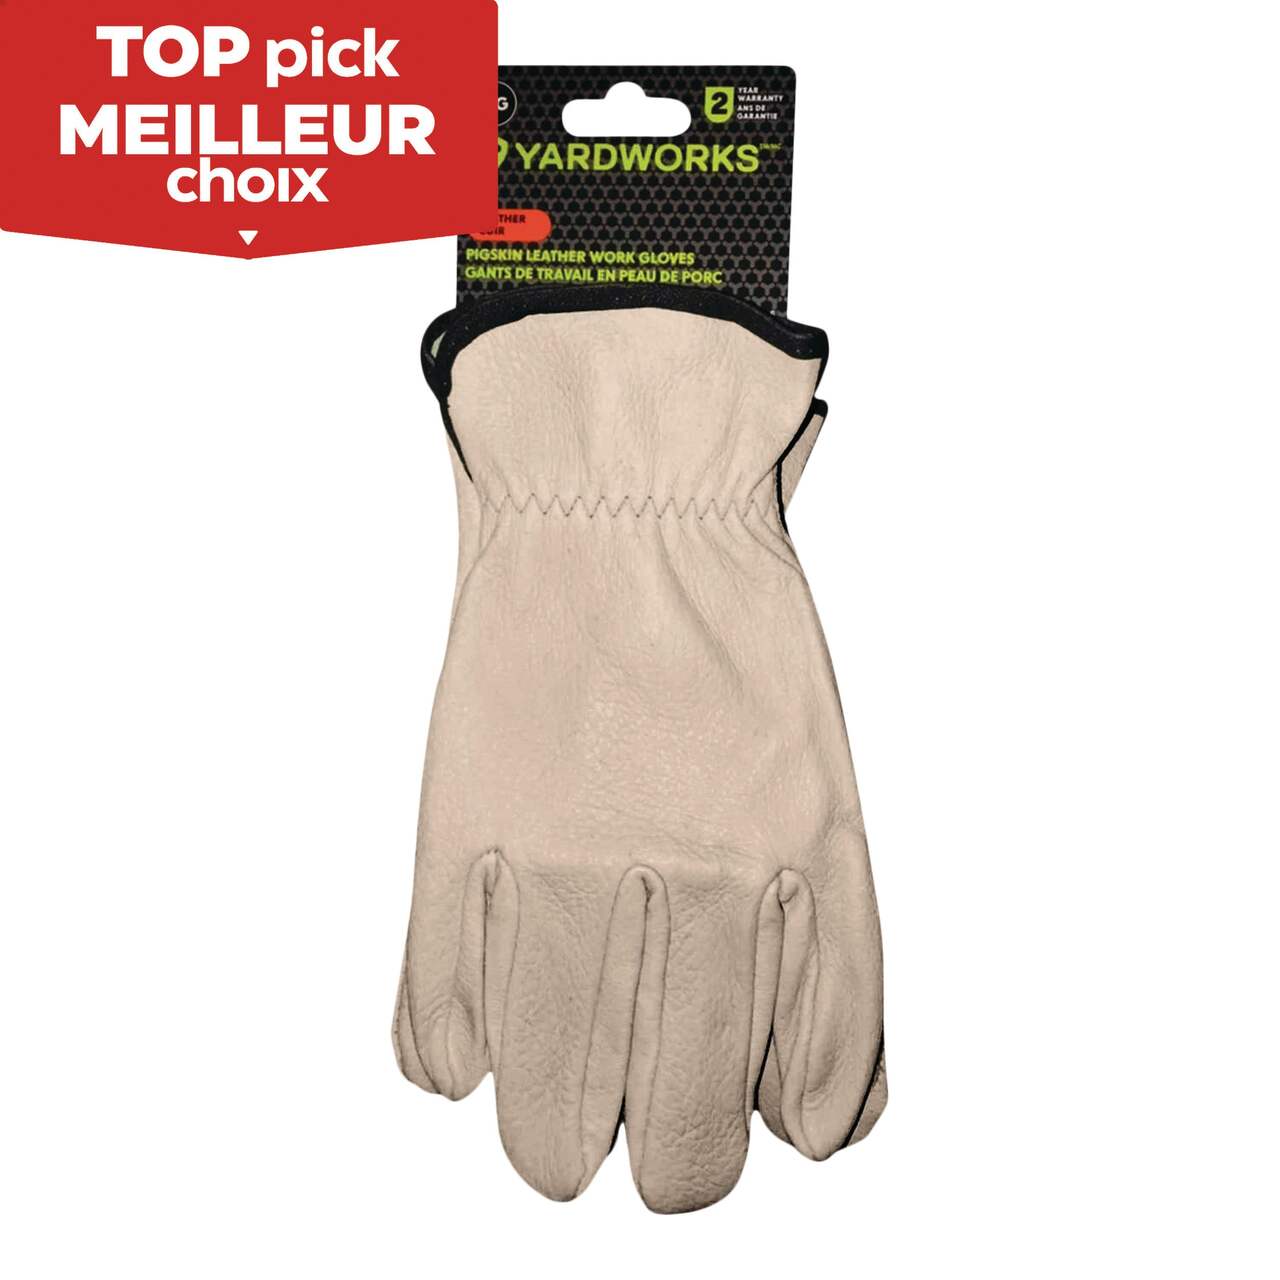 Yardworks Pig Skin Leather Men's Work Gloves, One Size Fits Most, White